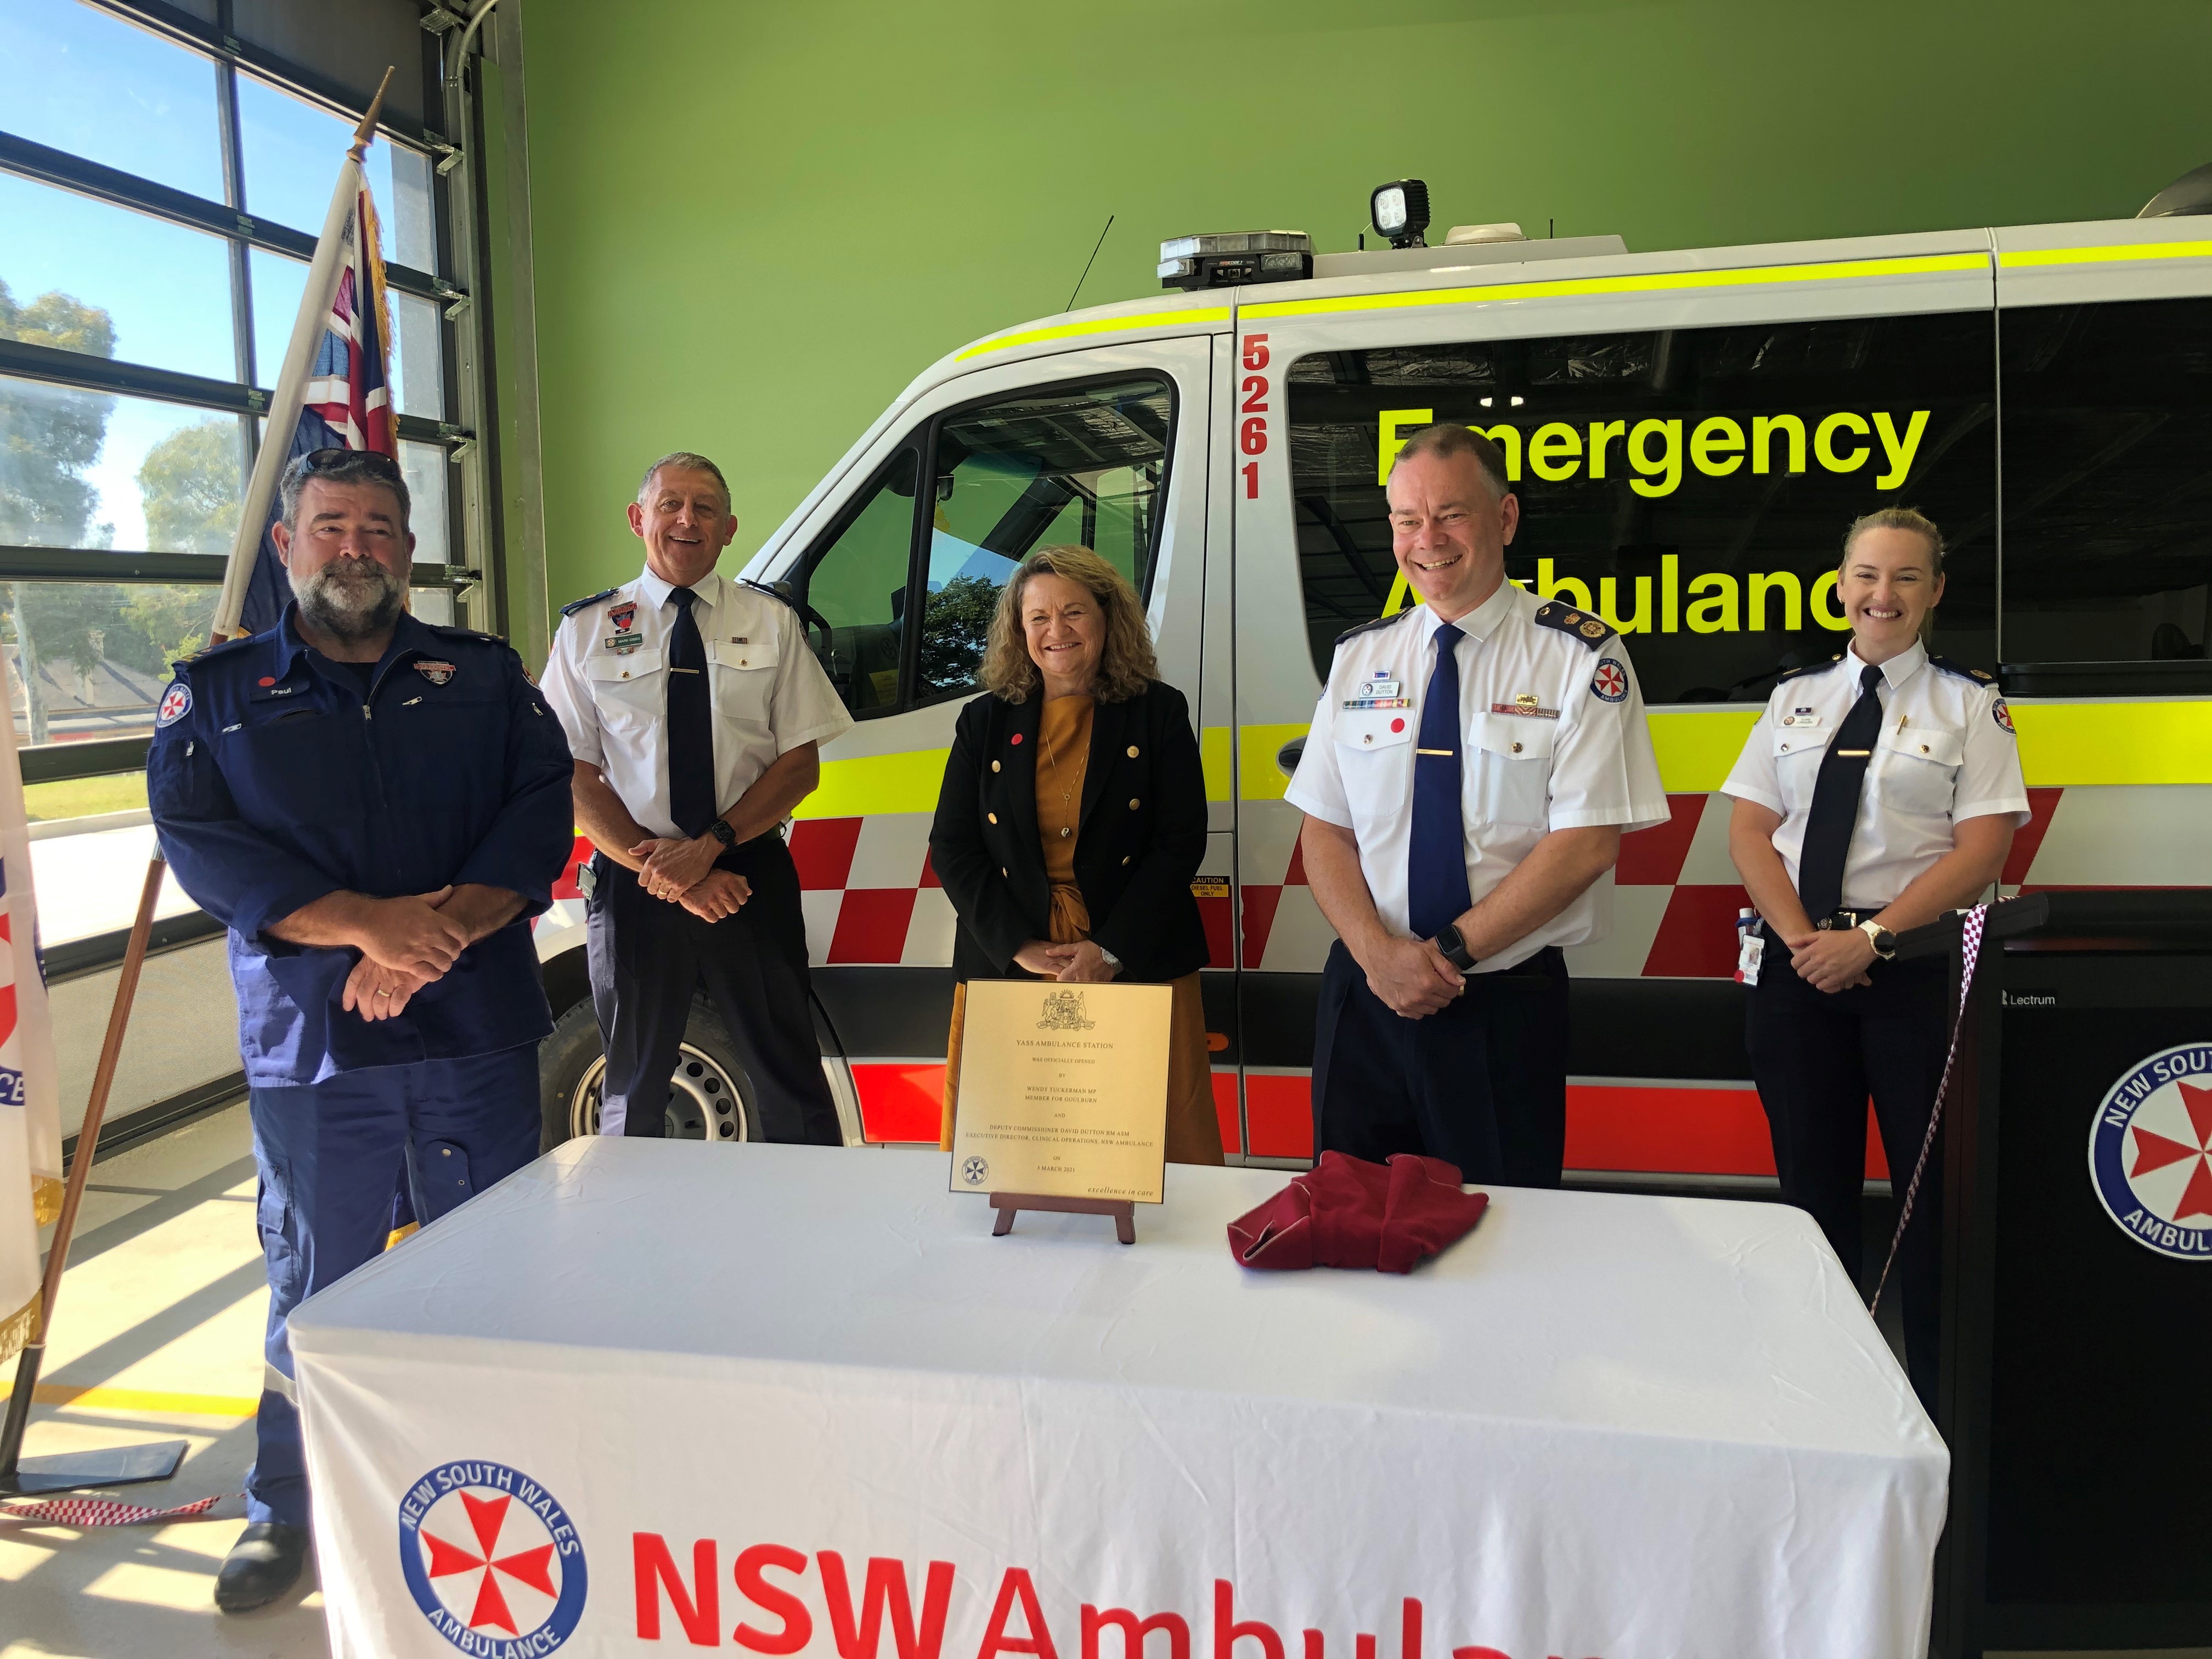 New ambulance station officially opens in Yass after 12-month delay